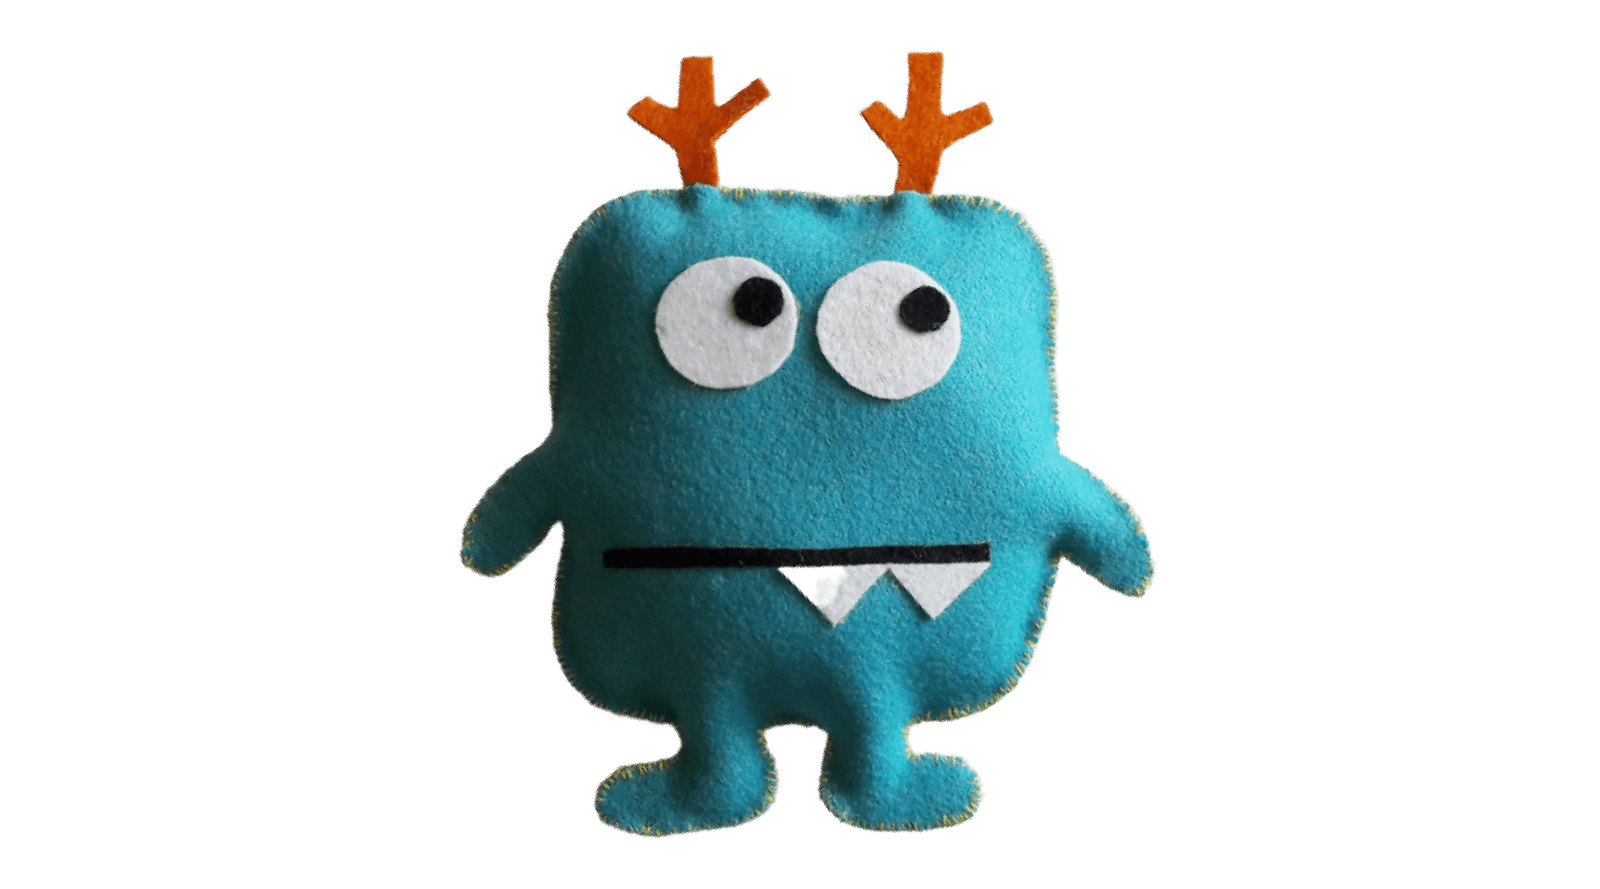 Toy Making Workshop | Make Your Own Mini Monster - Authindia